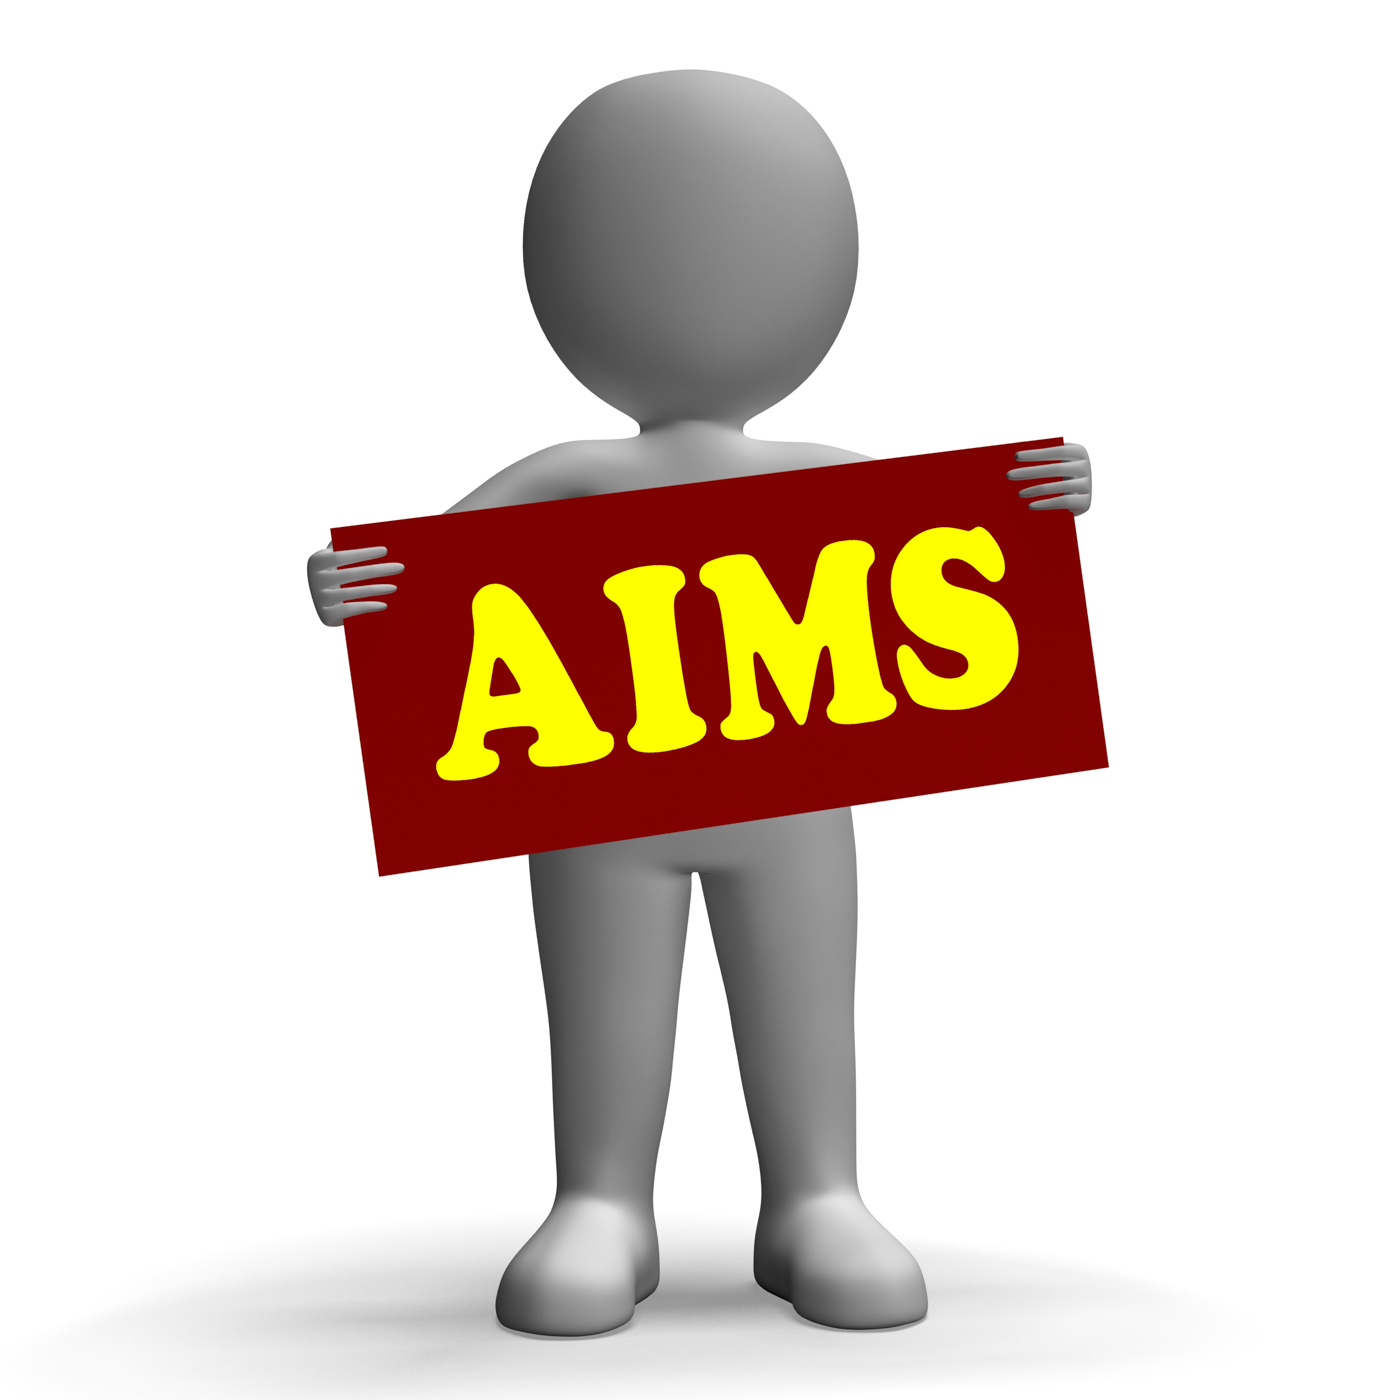 Aims Sign Character Means Aspirations And Goals, Aim, Aiming, Aims, Ambition, HQ Photo